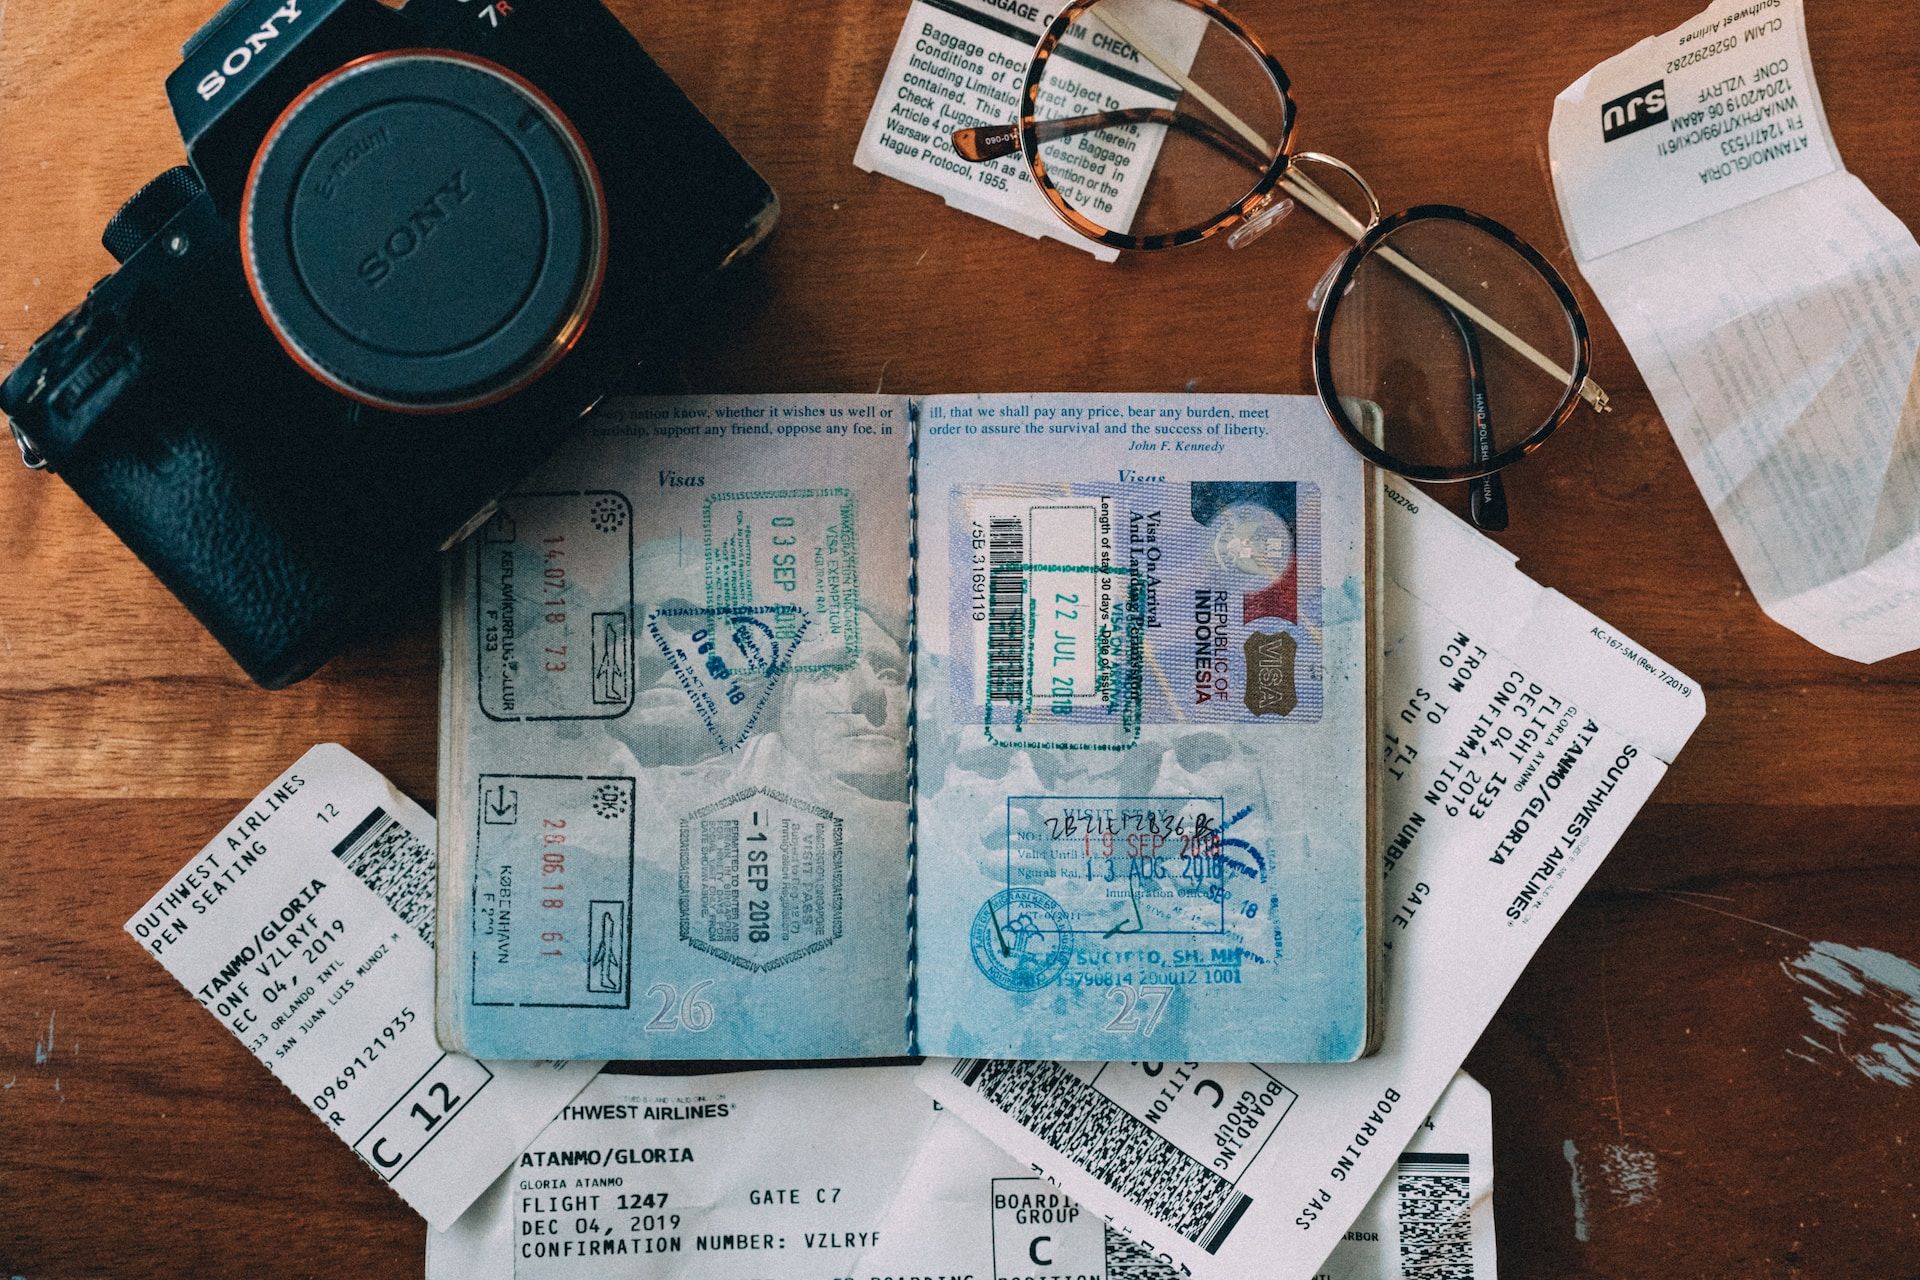 Passport, plane tickets, camera, glasses and receipts